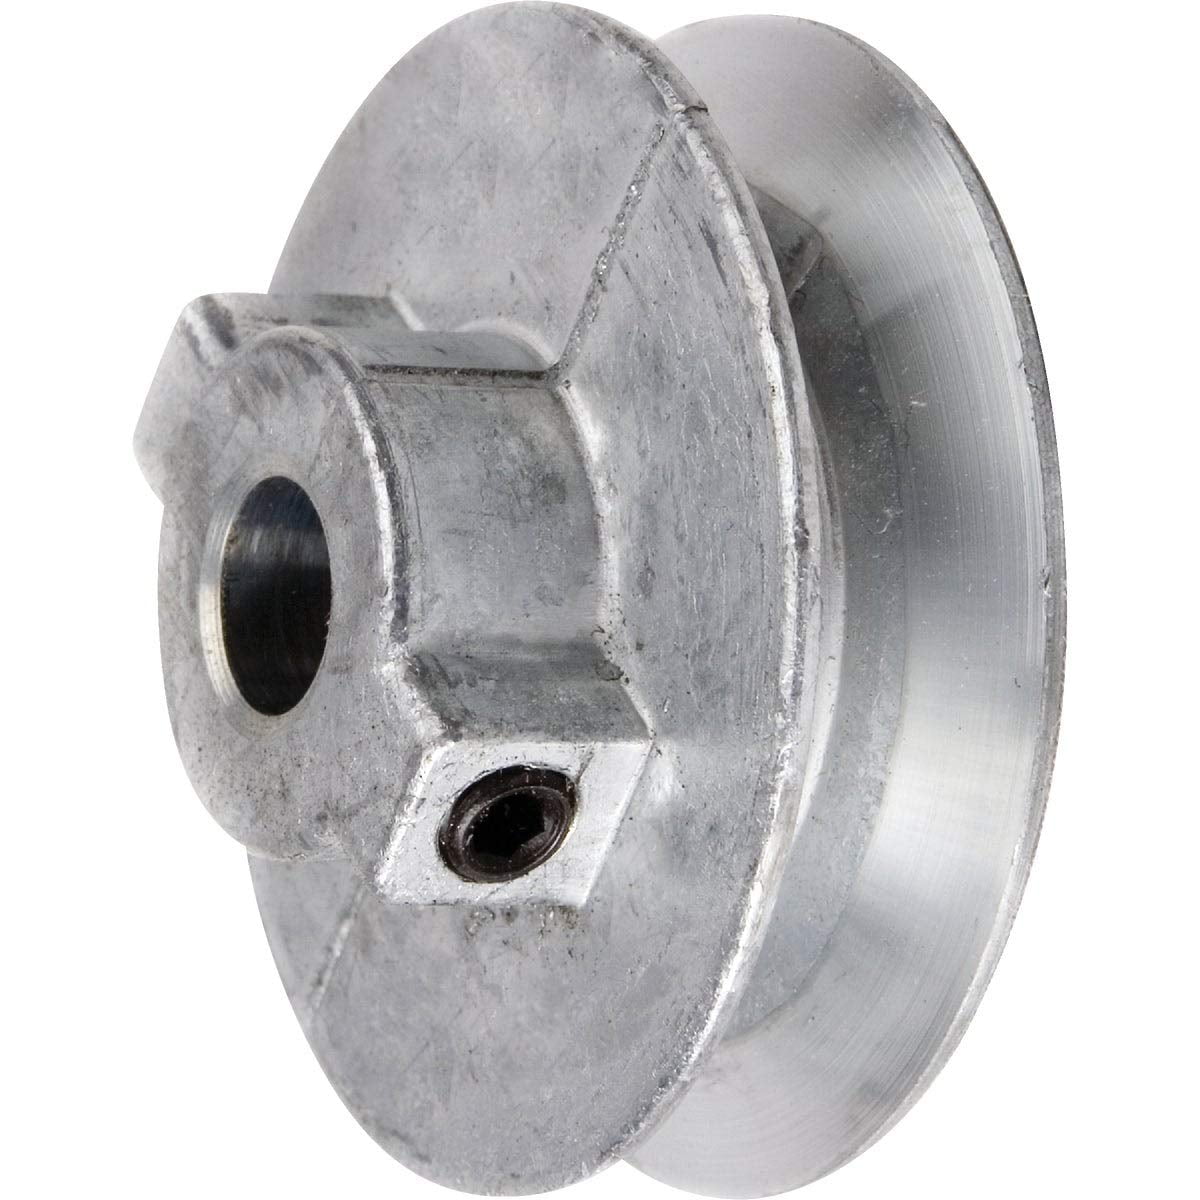 2.5" X 5/8" Single Groove Fixed Bore "A" Pulley # AK25X5/8 